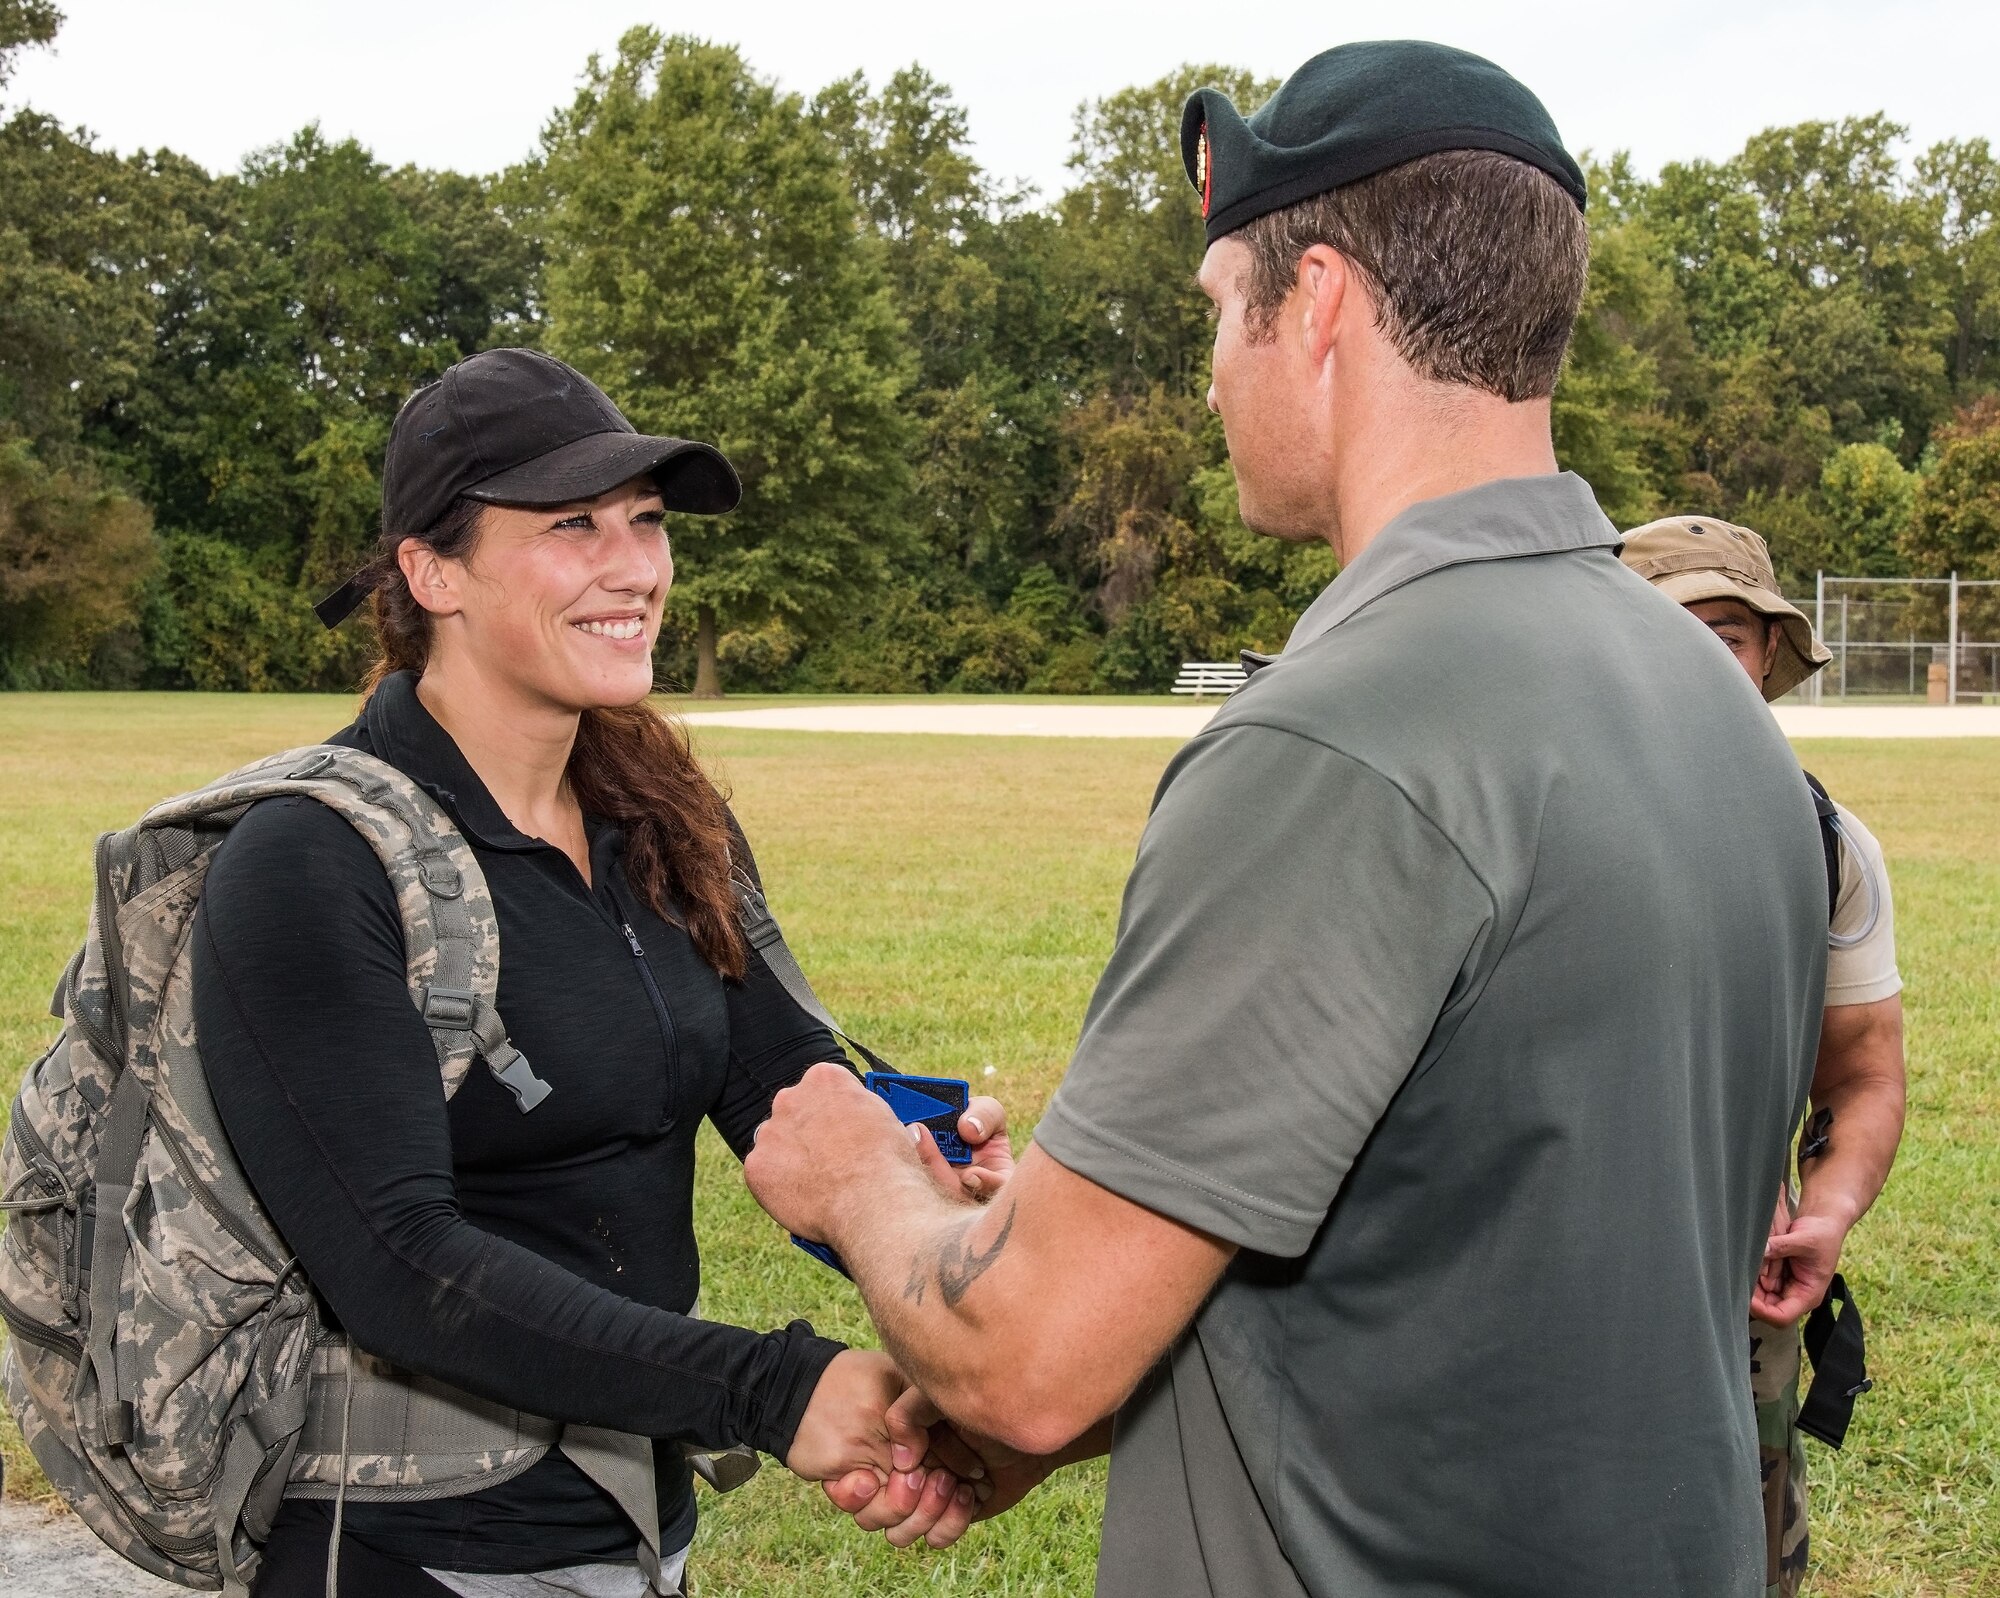 Brittany Bailey, 436th Logistics Readiness Squadron vehicle mechanic, receives her 2017 GORUCK Light patch from U.S. Army Master Sgt. Todd Fetzer, 1st Special Forces Command (Airborne), Ft. Bragg, N.C., Oct. 6, 2017, at Brecknock Park in Camden, Del. Bailey was one of 29 individuals who completed the GORUCK Challenge. (U.S. Air Force photo by Roland Balik)